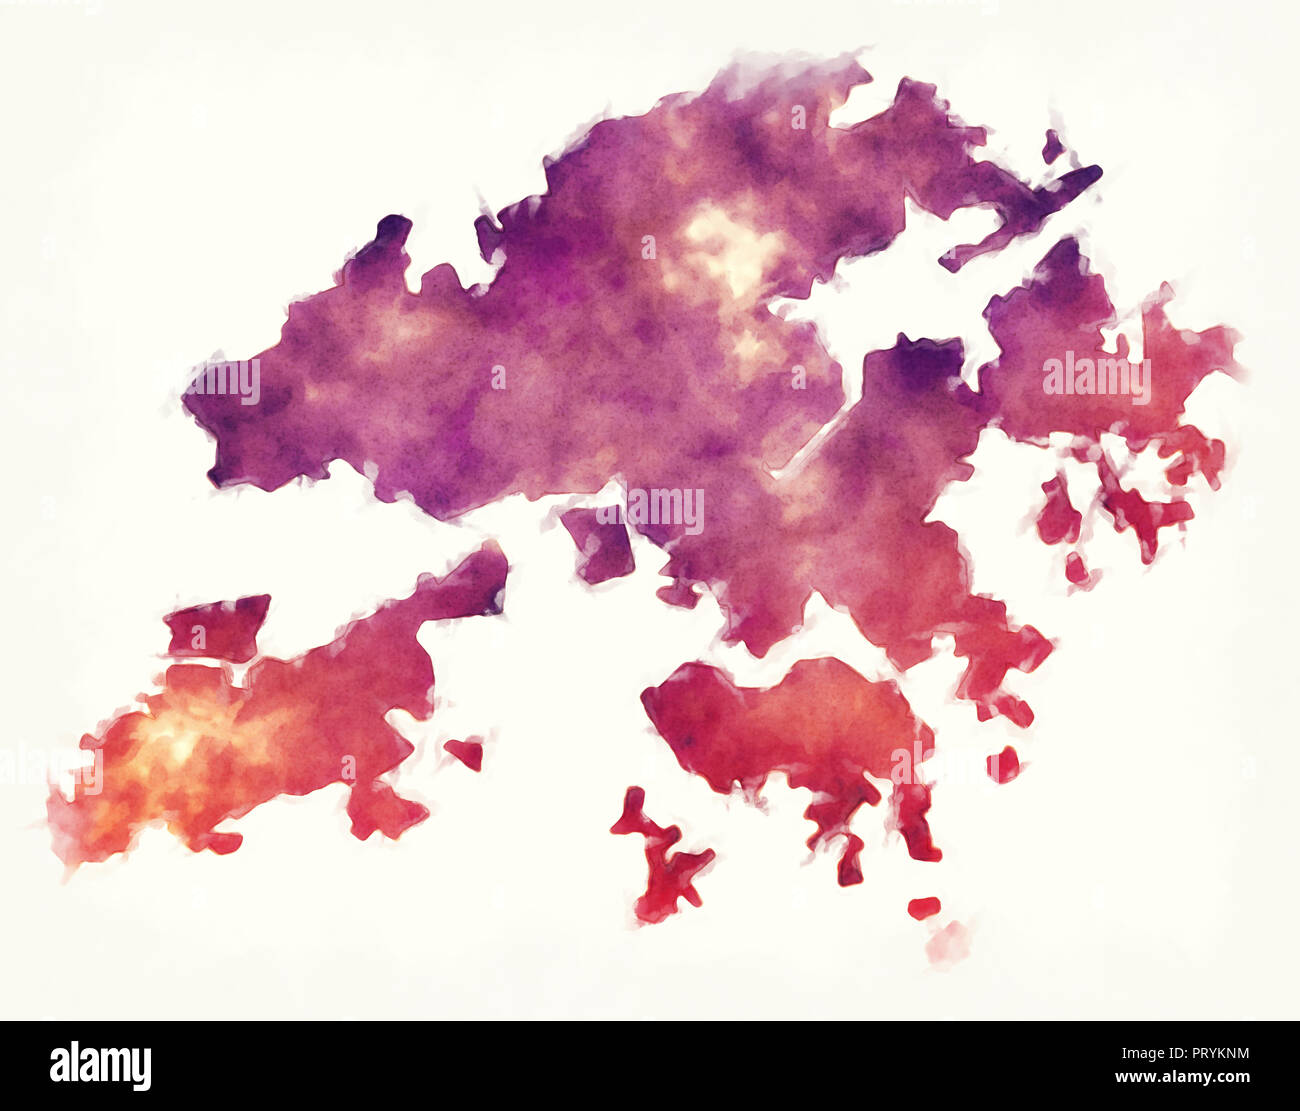 Hong Kong special administrative watercolor map of China in front of a white background Stock Photo